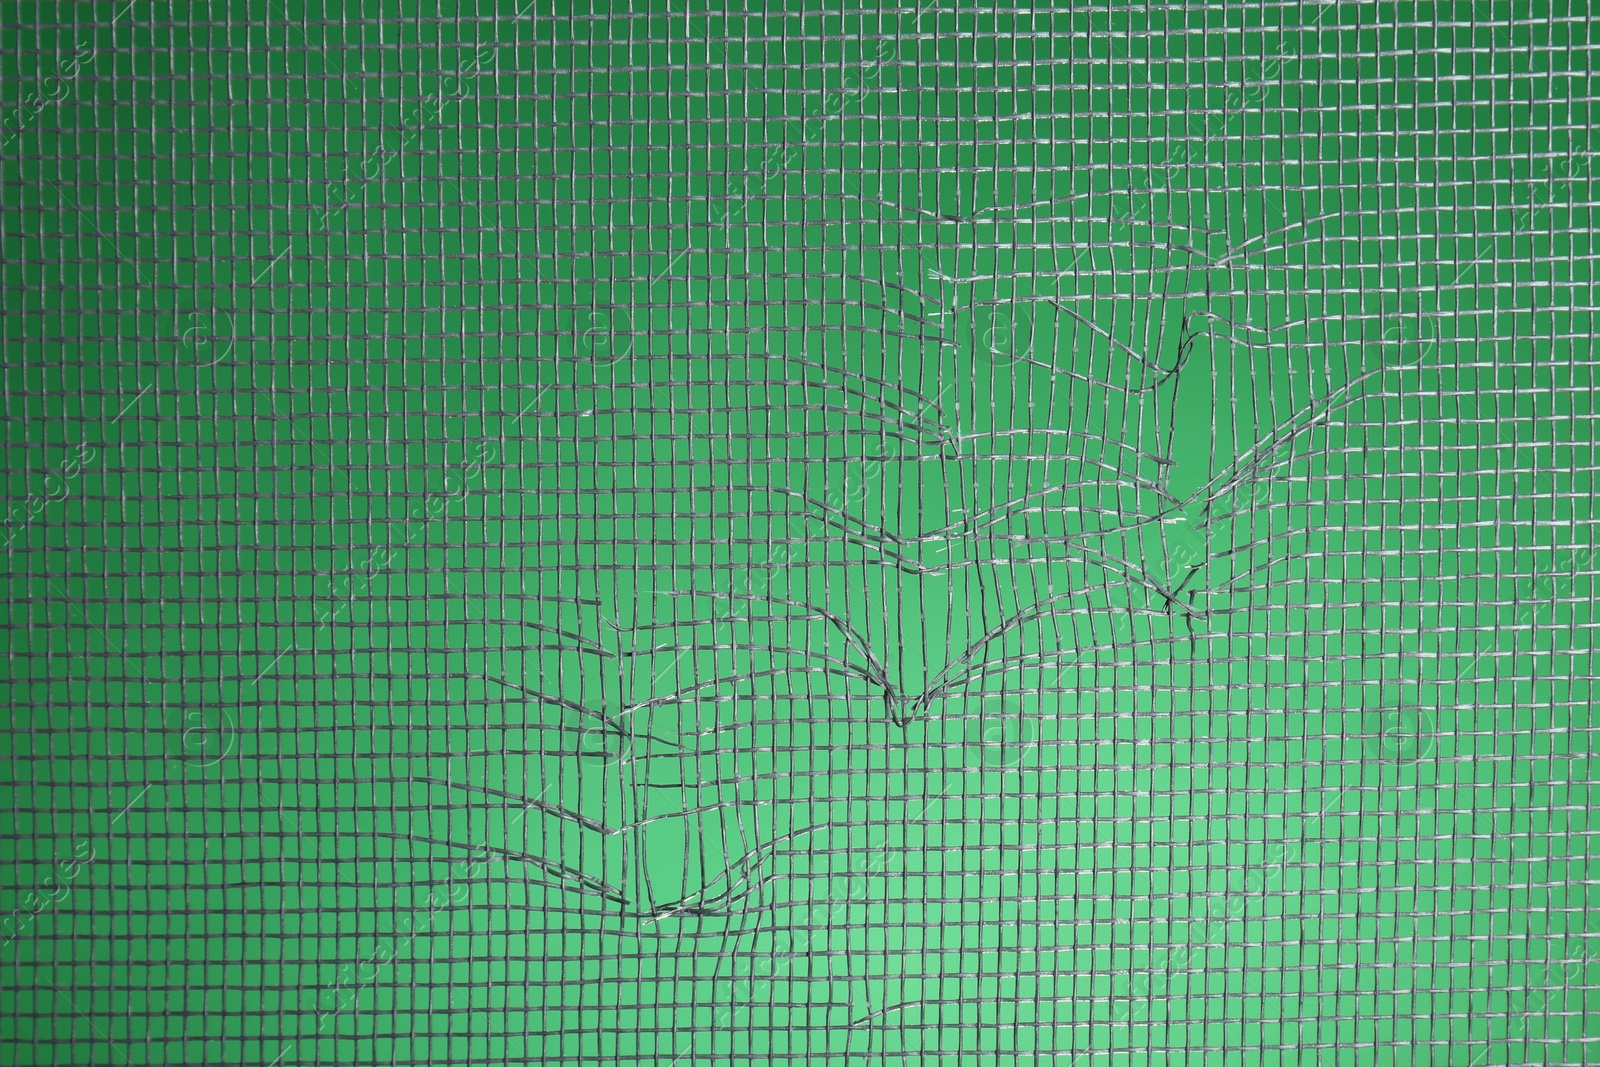 Photo of Torn window screen against green background, closeup